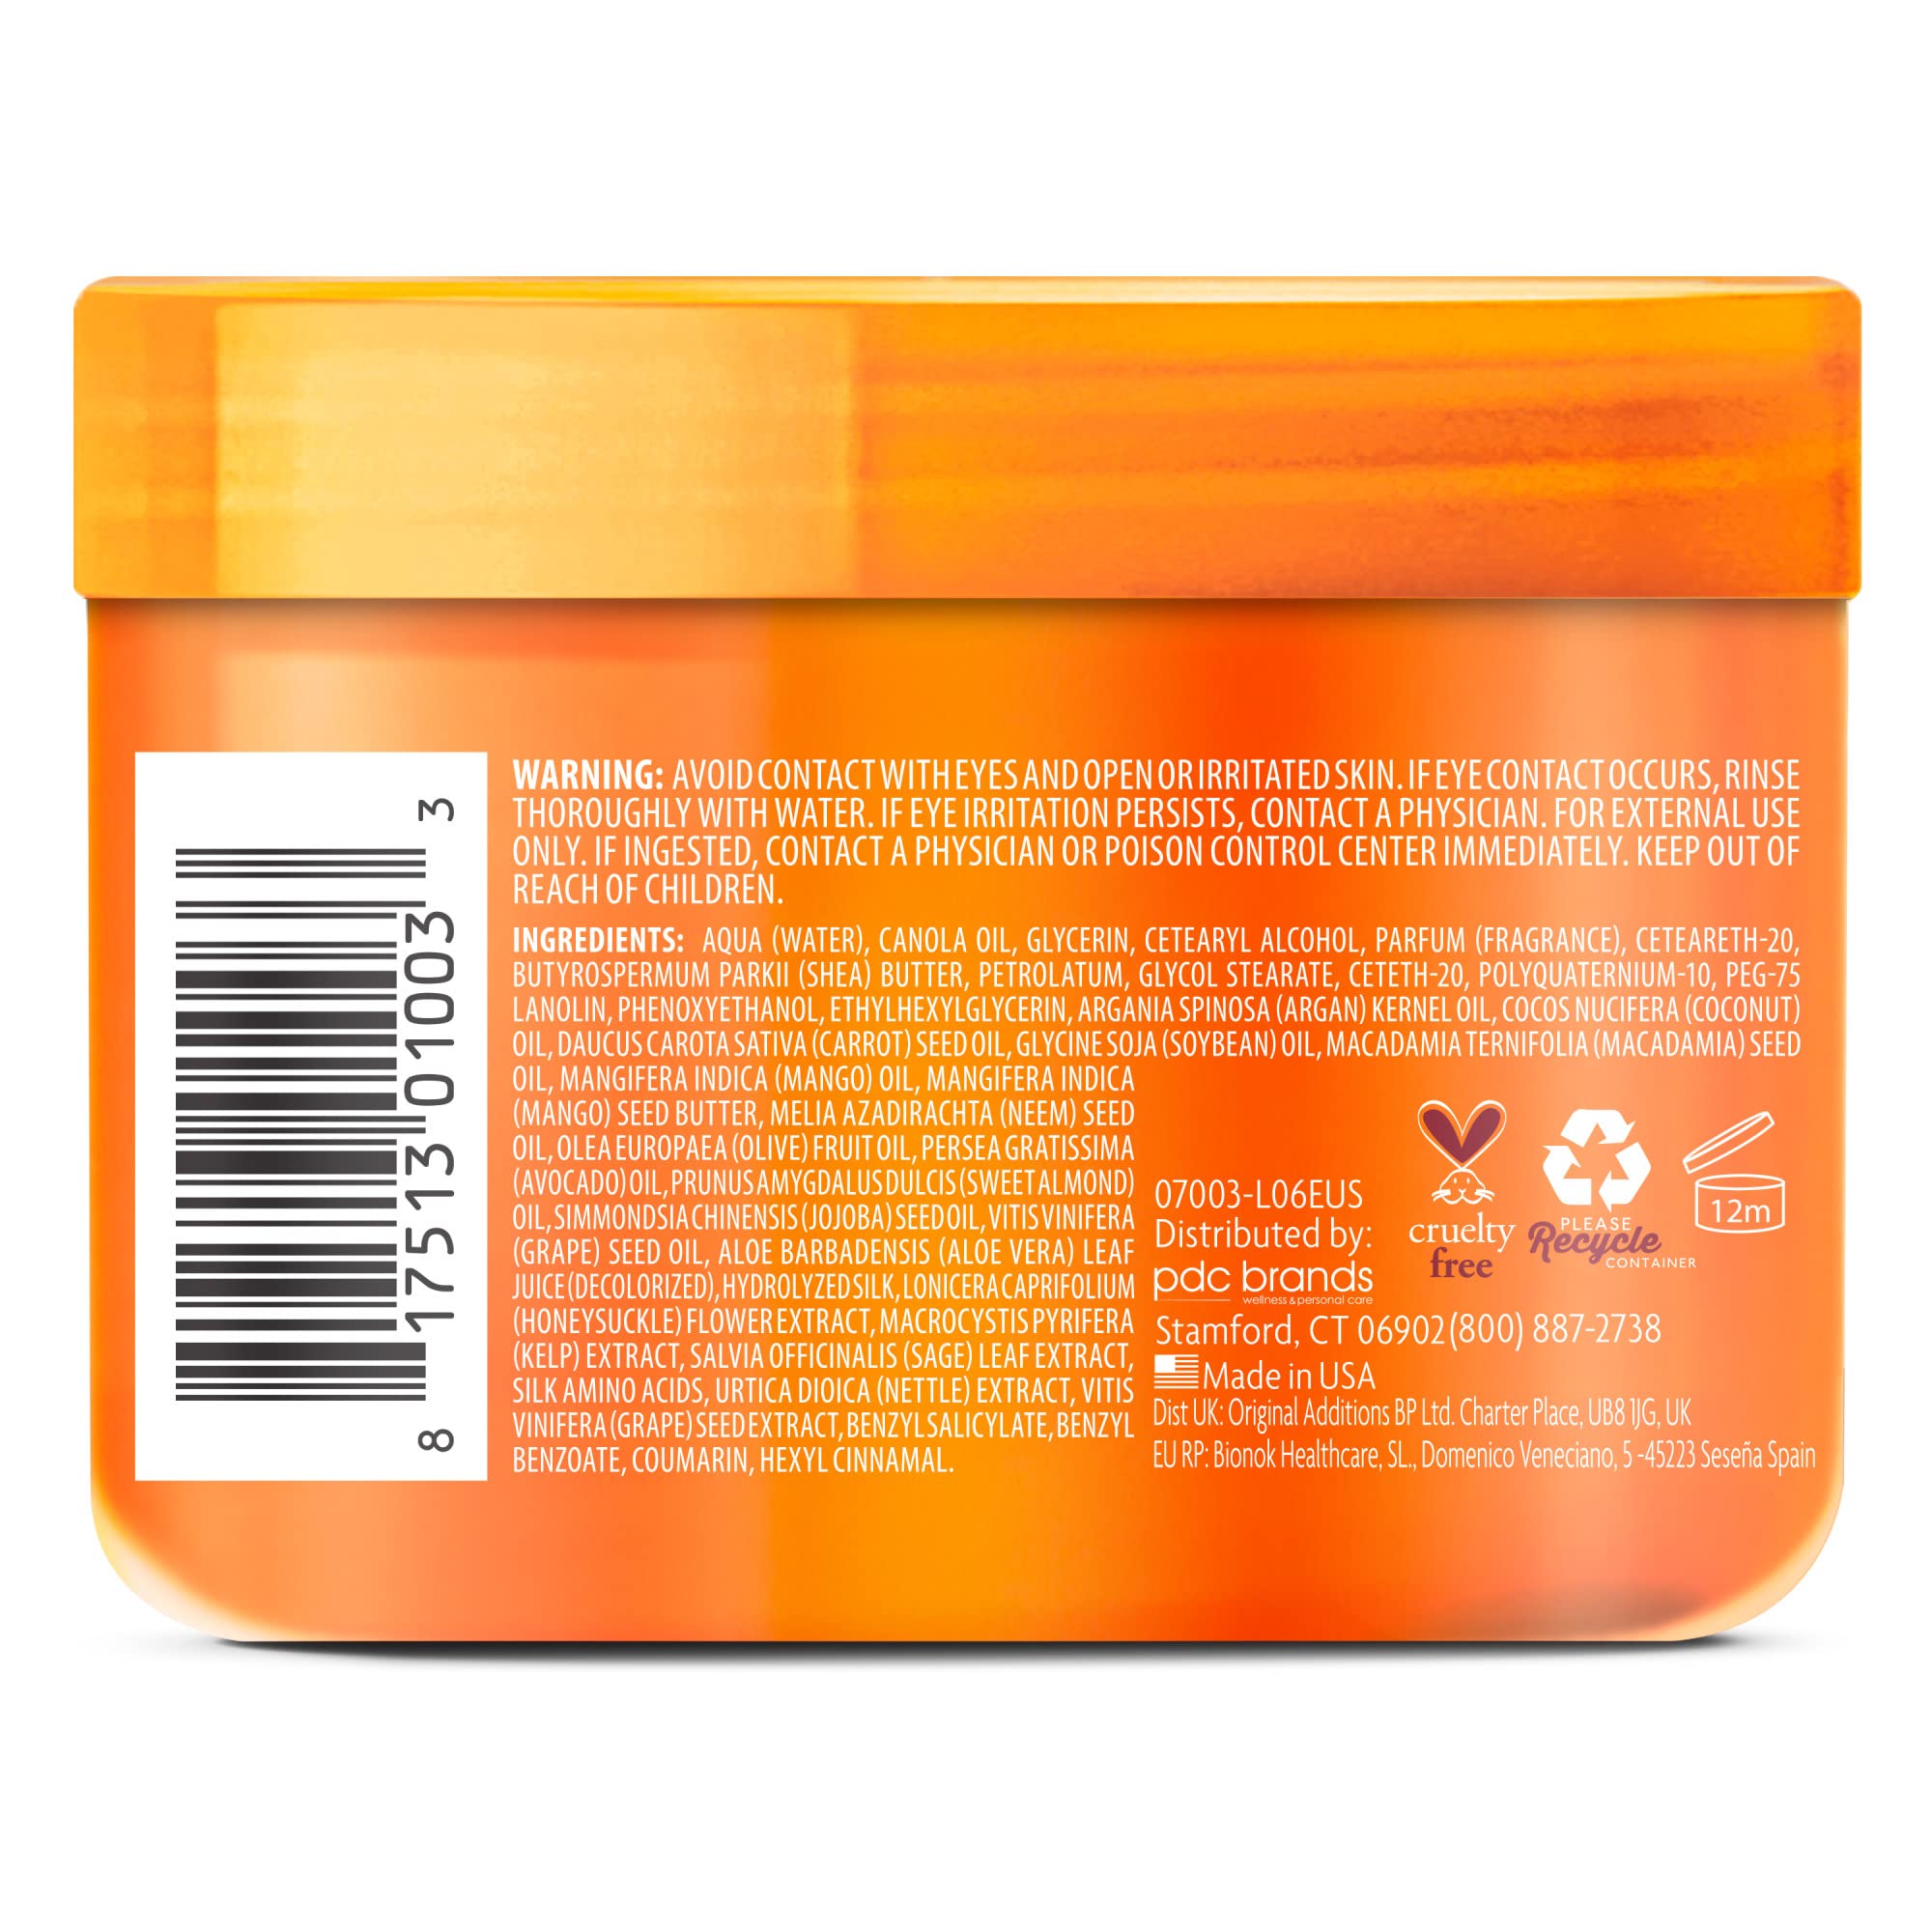 Cantu Coconut Curling Cream with Shea Butter for Natural Hair, 12 oz (Packaging May Vary)